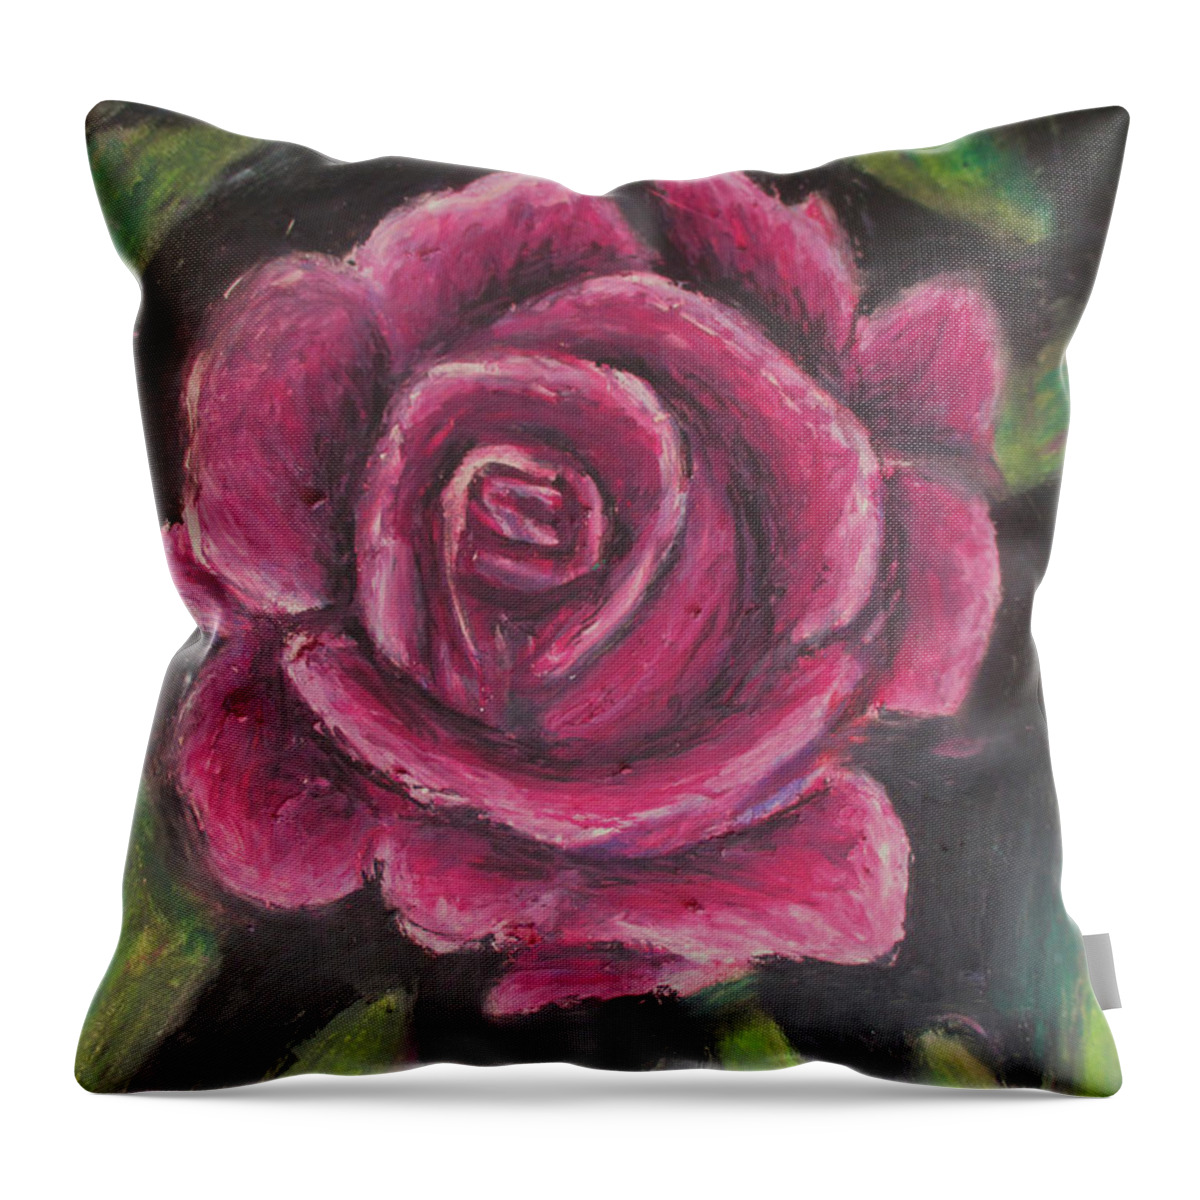 Rose Throw Pillow featuring the painting Rosy Pink by Jen Shearer